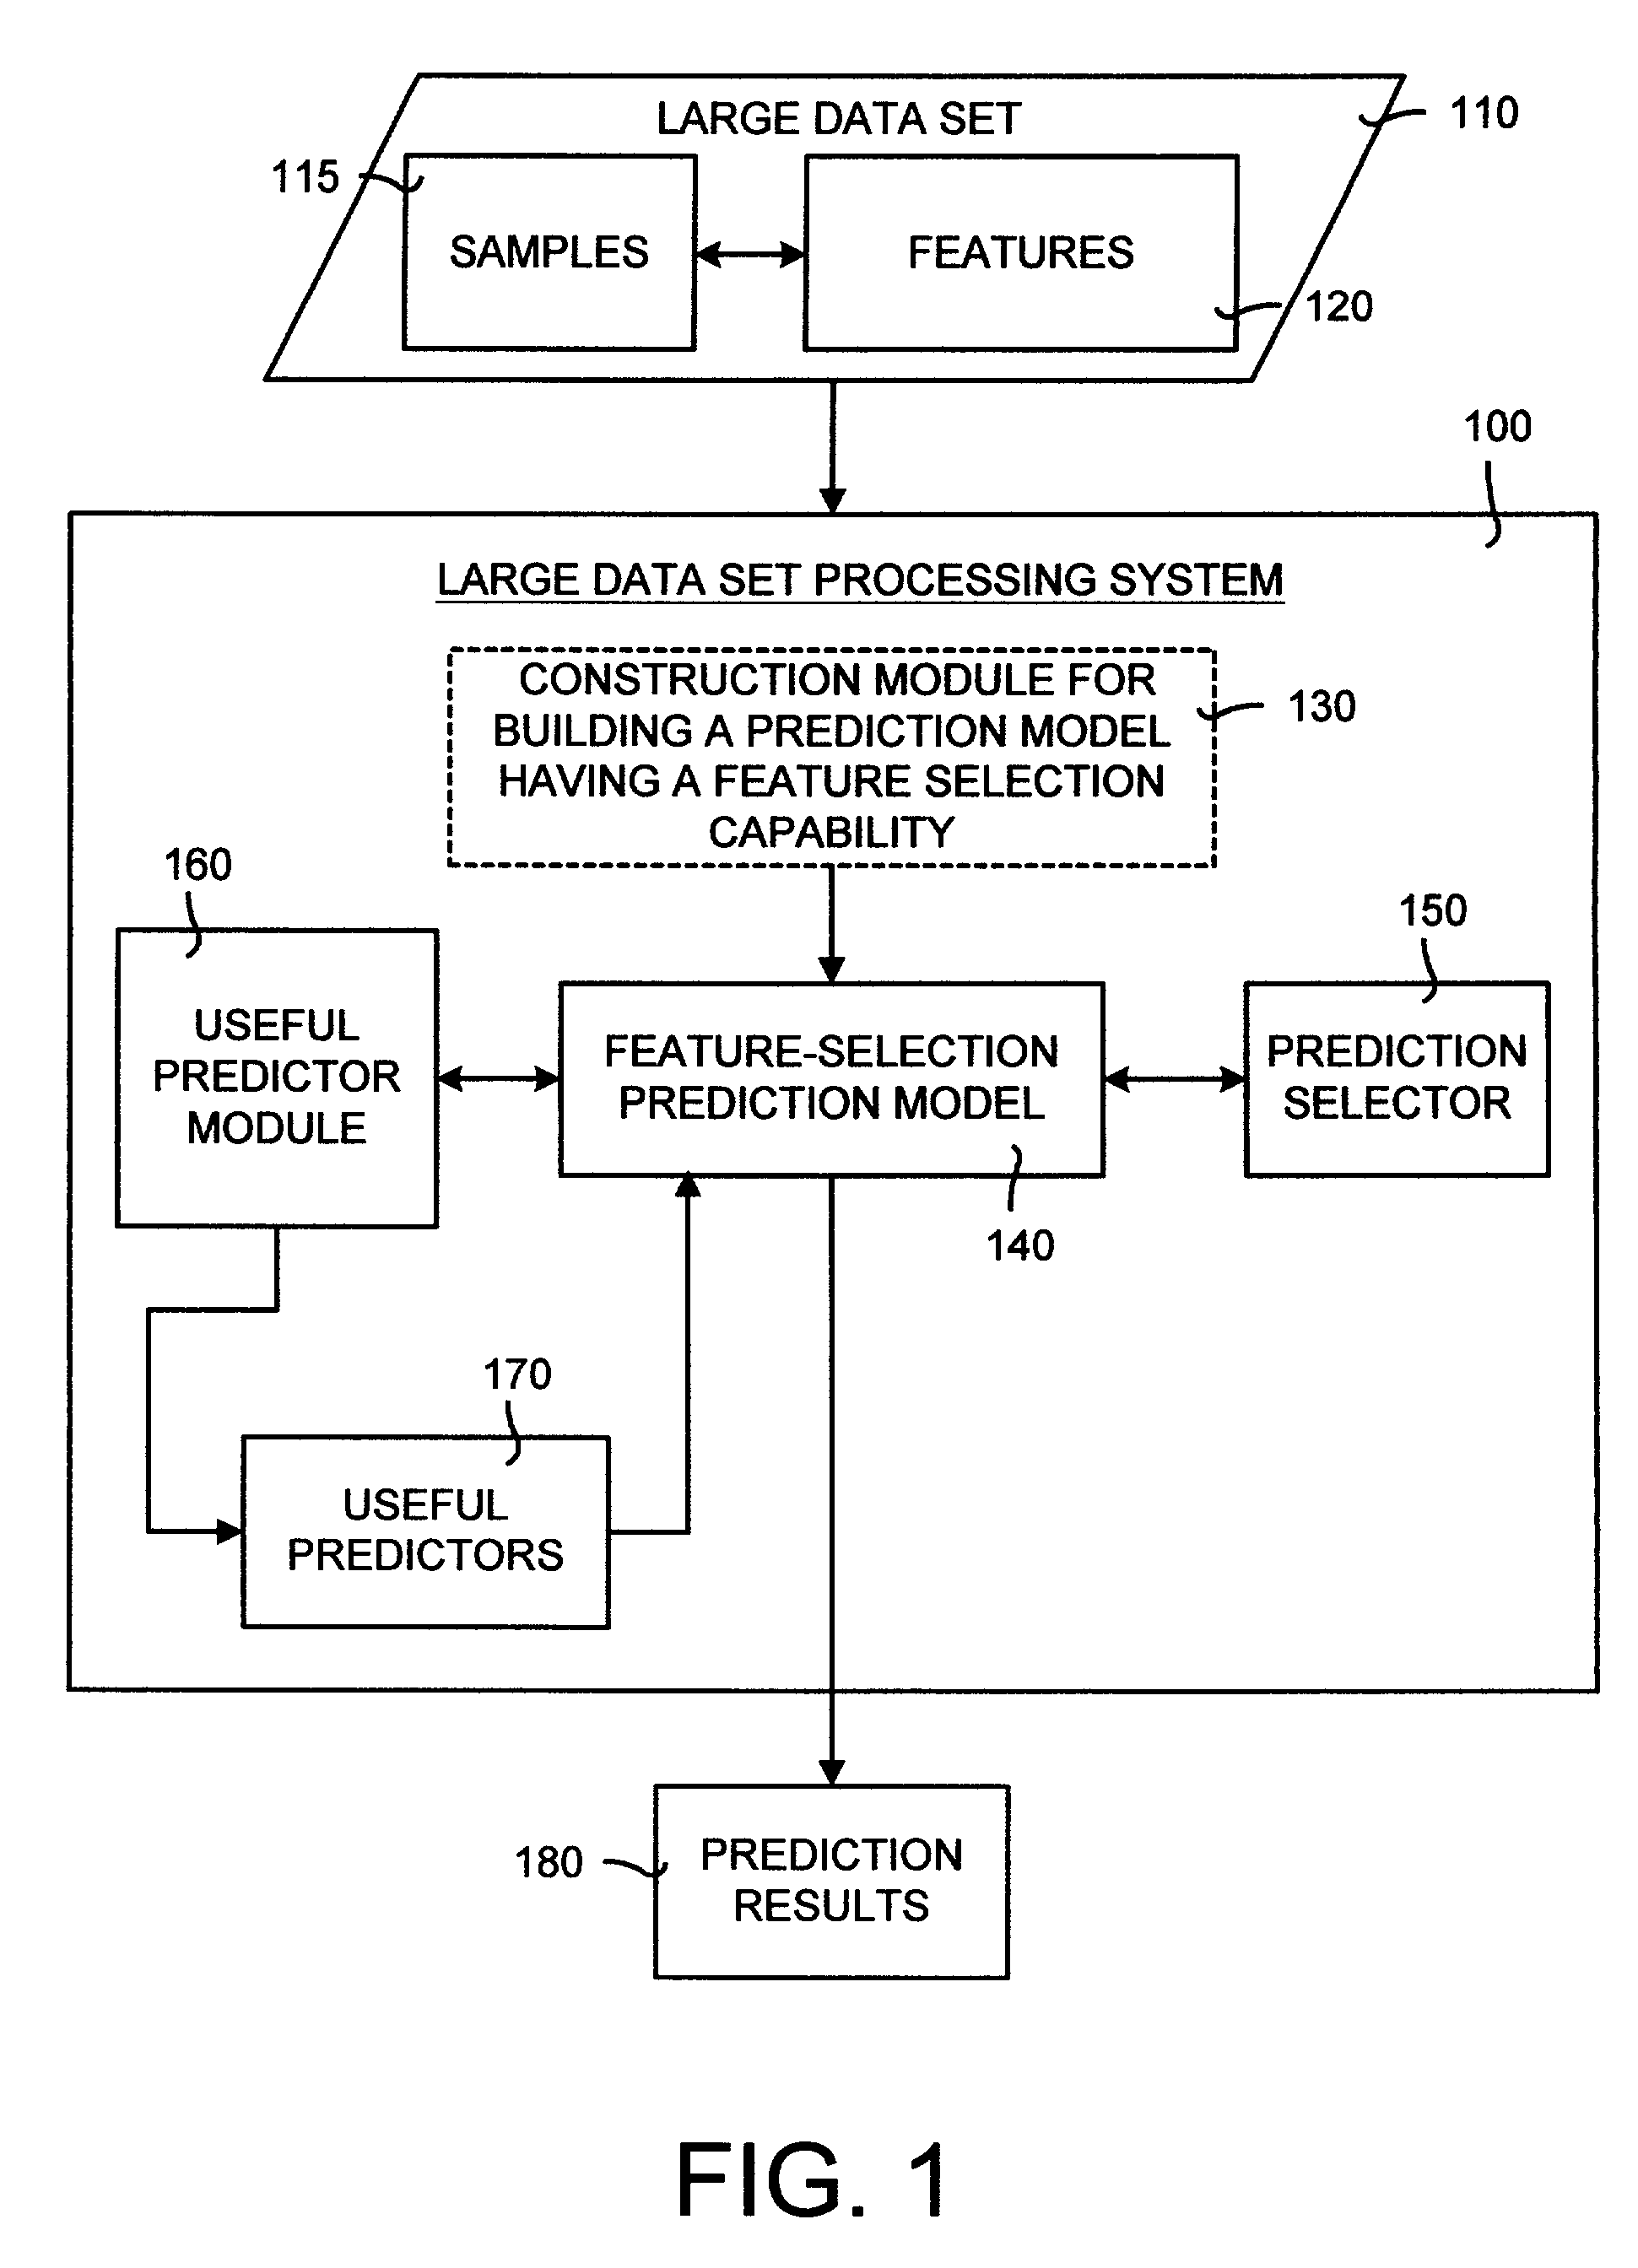 System and method for processing a large data set using a prediction model having a feature selection capability